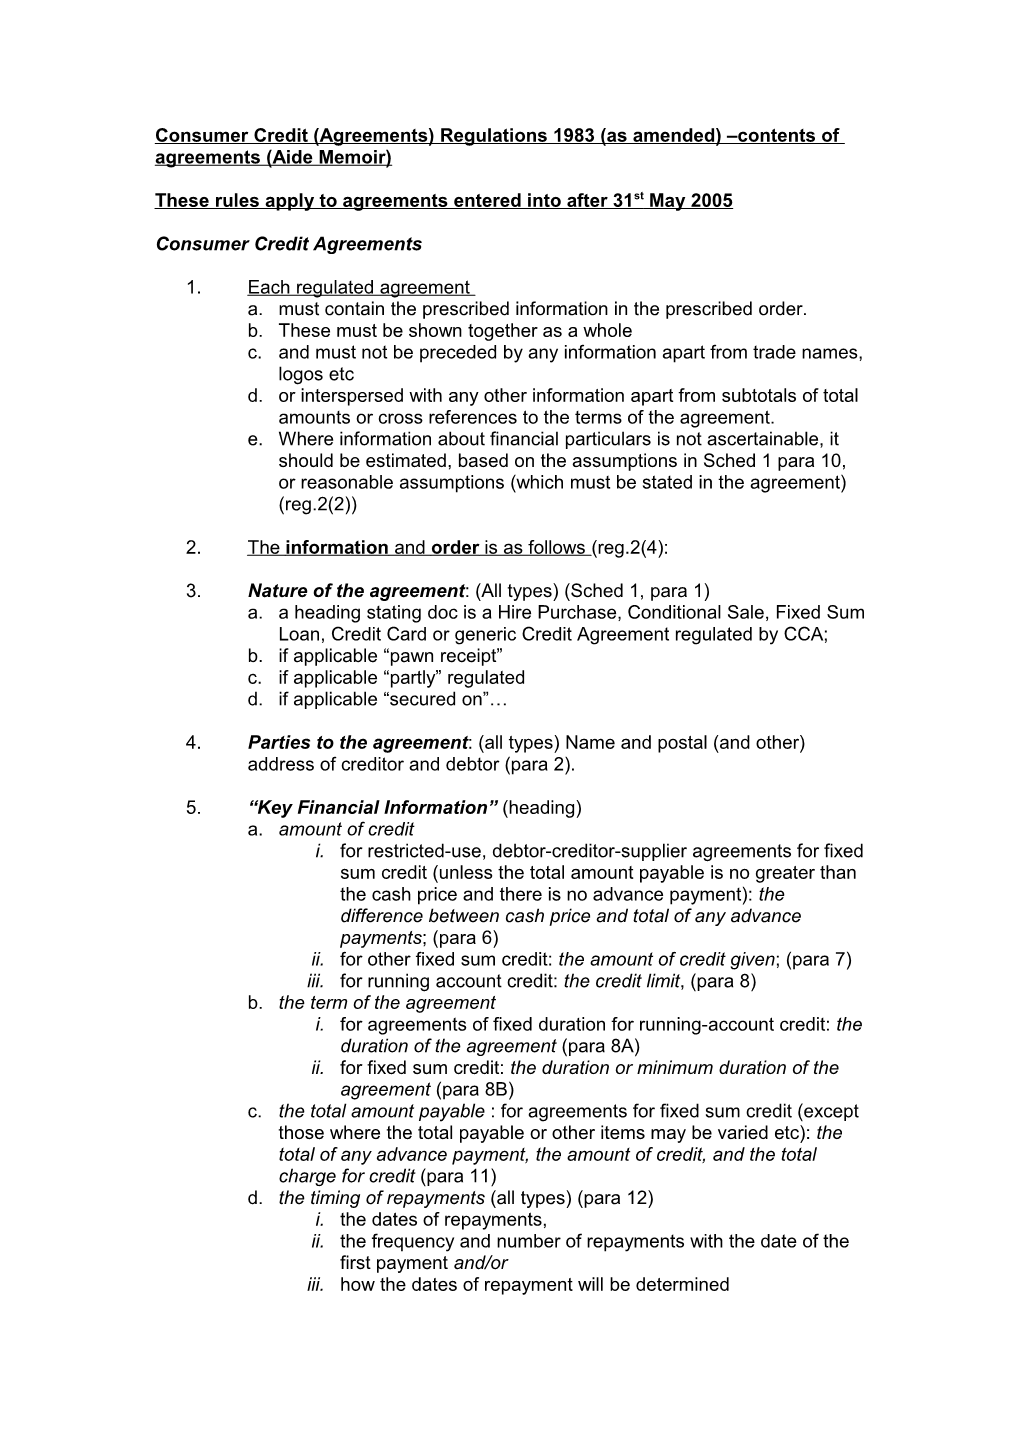 Consumer Credit (Agreements) Regulations 1983 (As Amended) Contents of Agreements